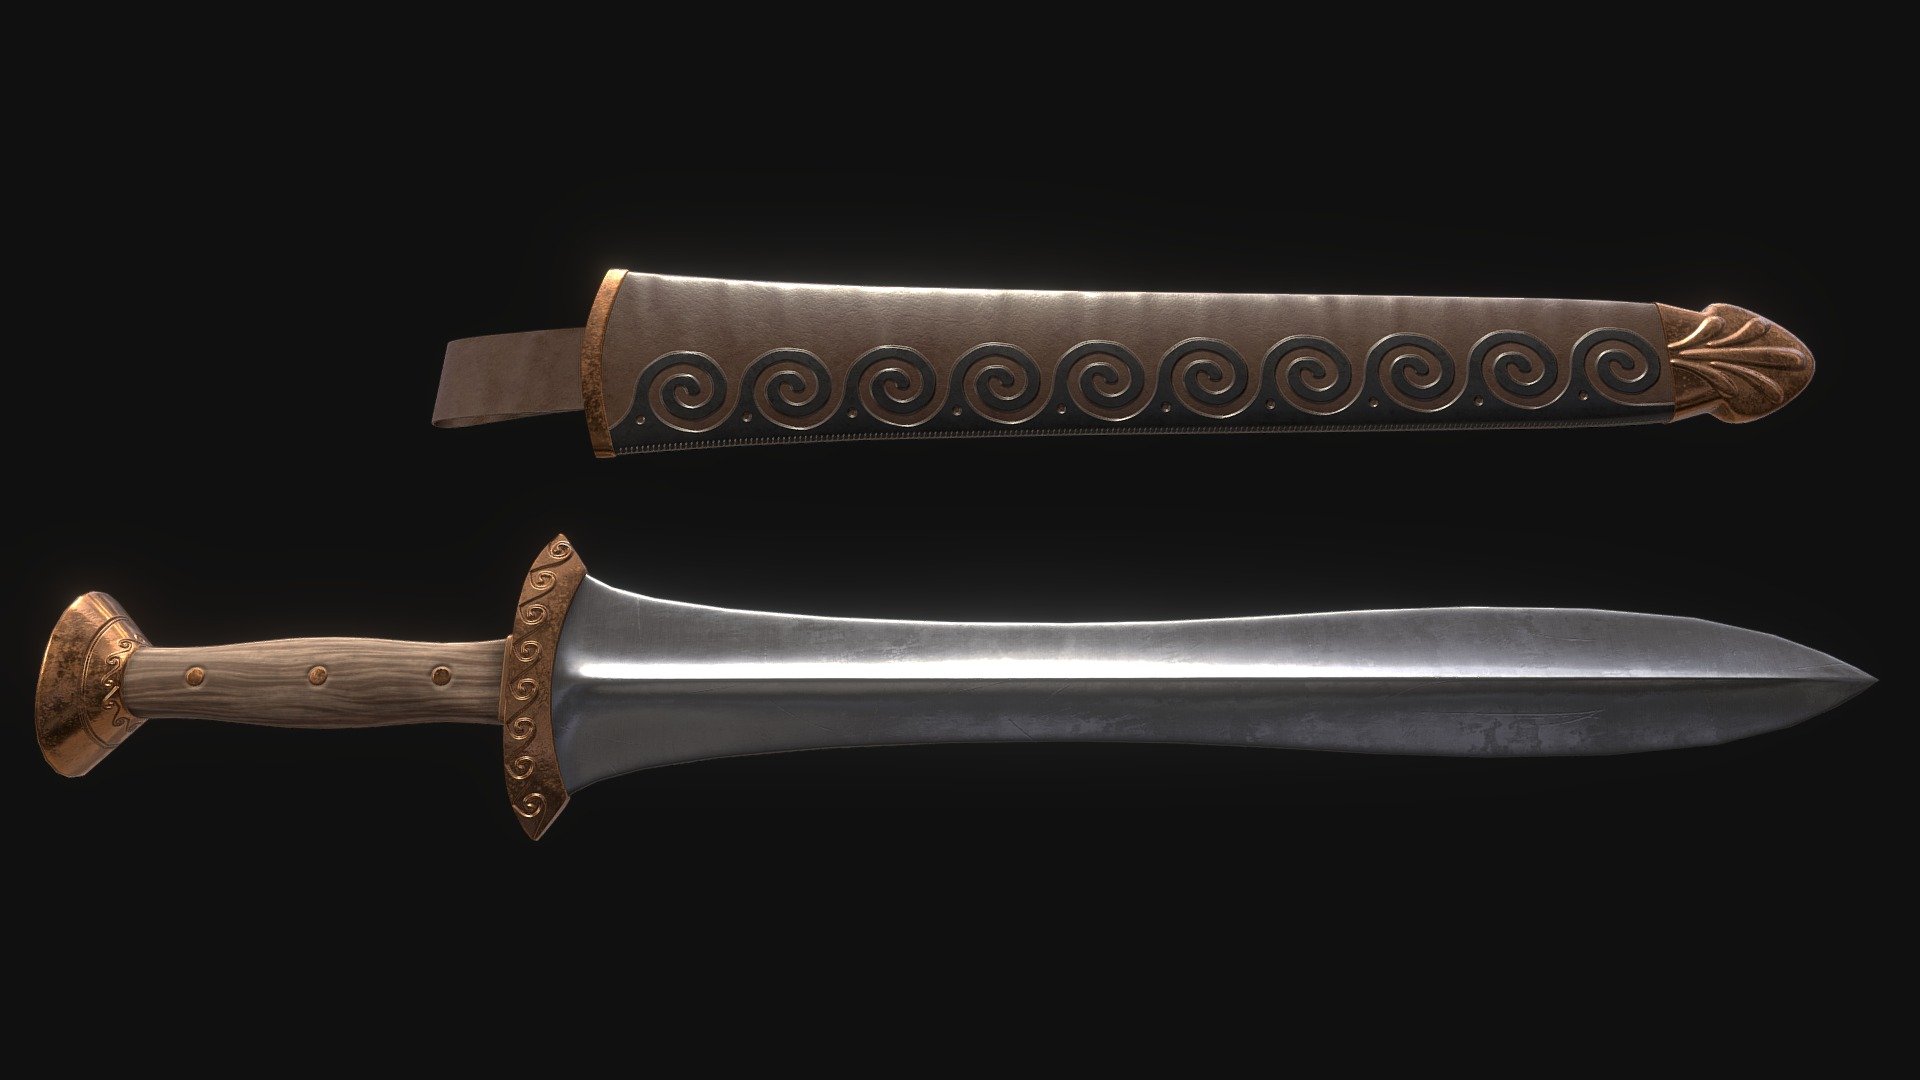 Ancient Greek Sword - Xiphos with sheats

Textures in 4k.

Modeled in Blender, textured in Substance.

Visit my Artstation for more renders and option to buy

Like, follow and stay tuned for more models!
 - Ancient Greek Xiphos (Sword) - 3D model by burning_umbrella (@burningumbrella69) 3d model